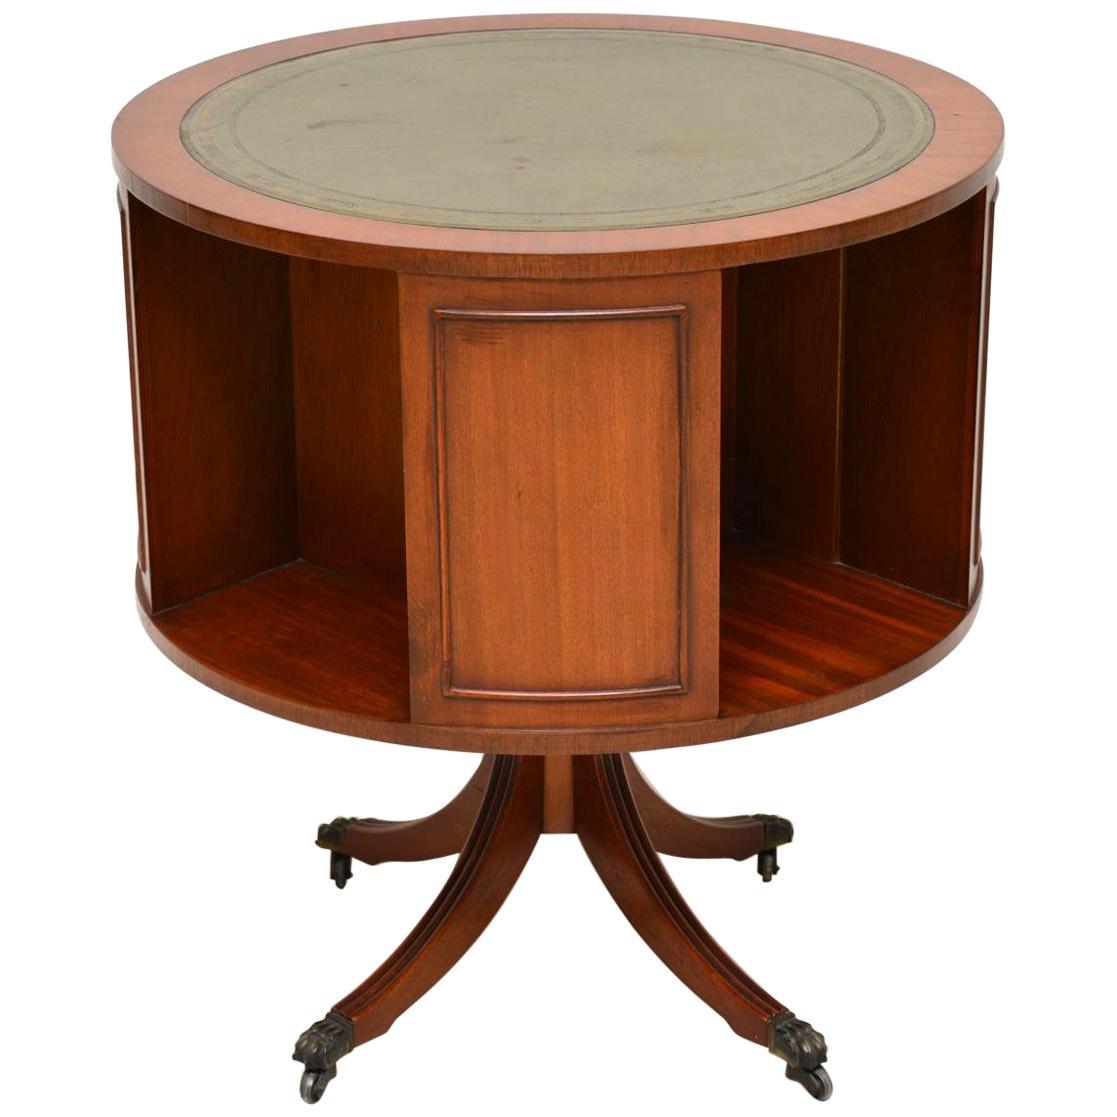 Antique Regency Style Mahogany & Leather Drum Table